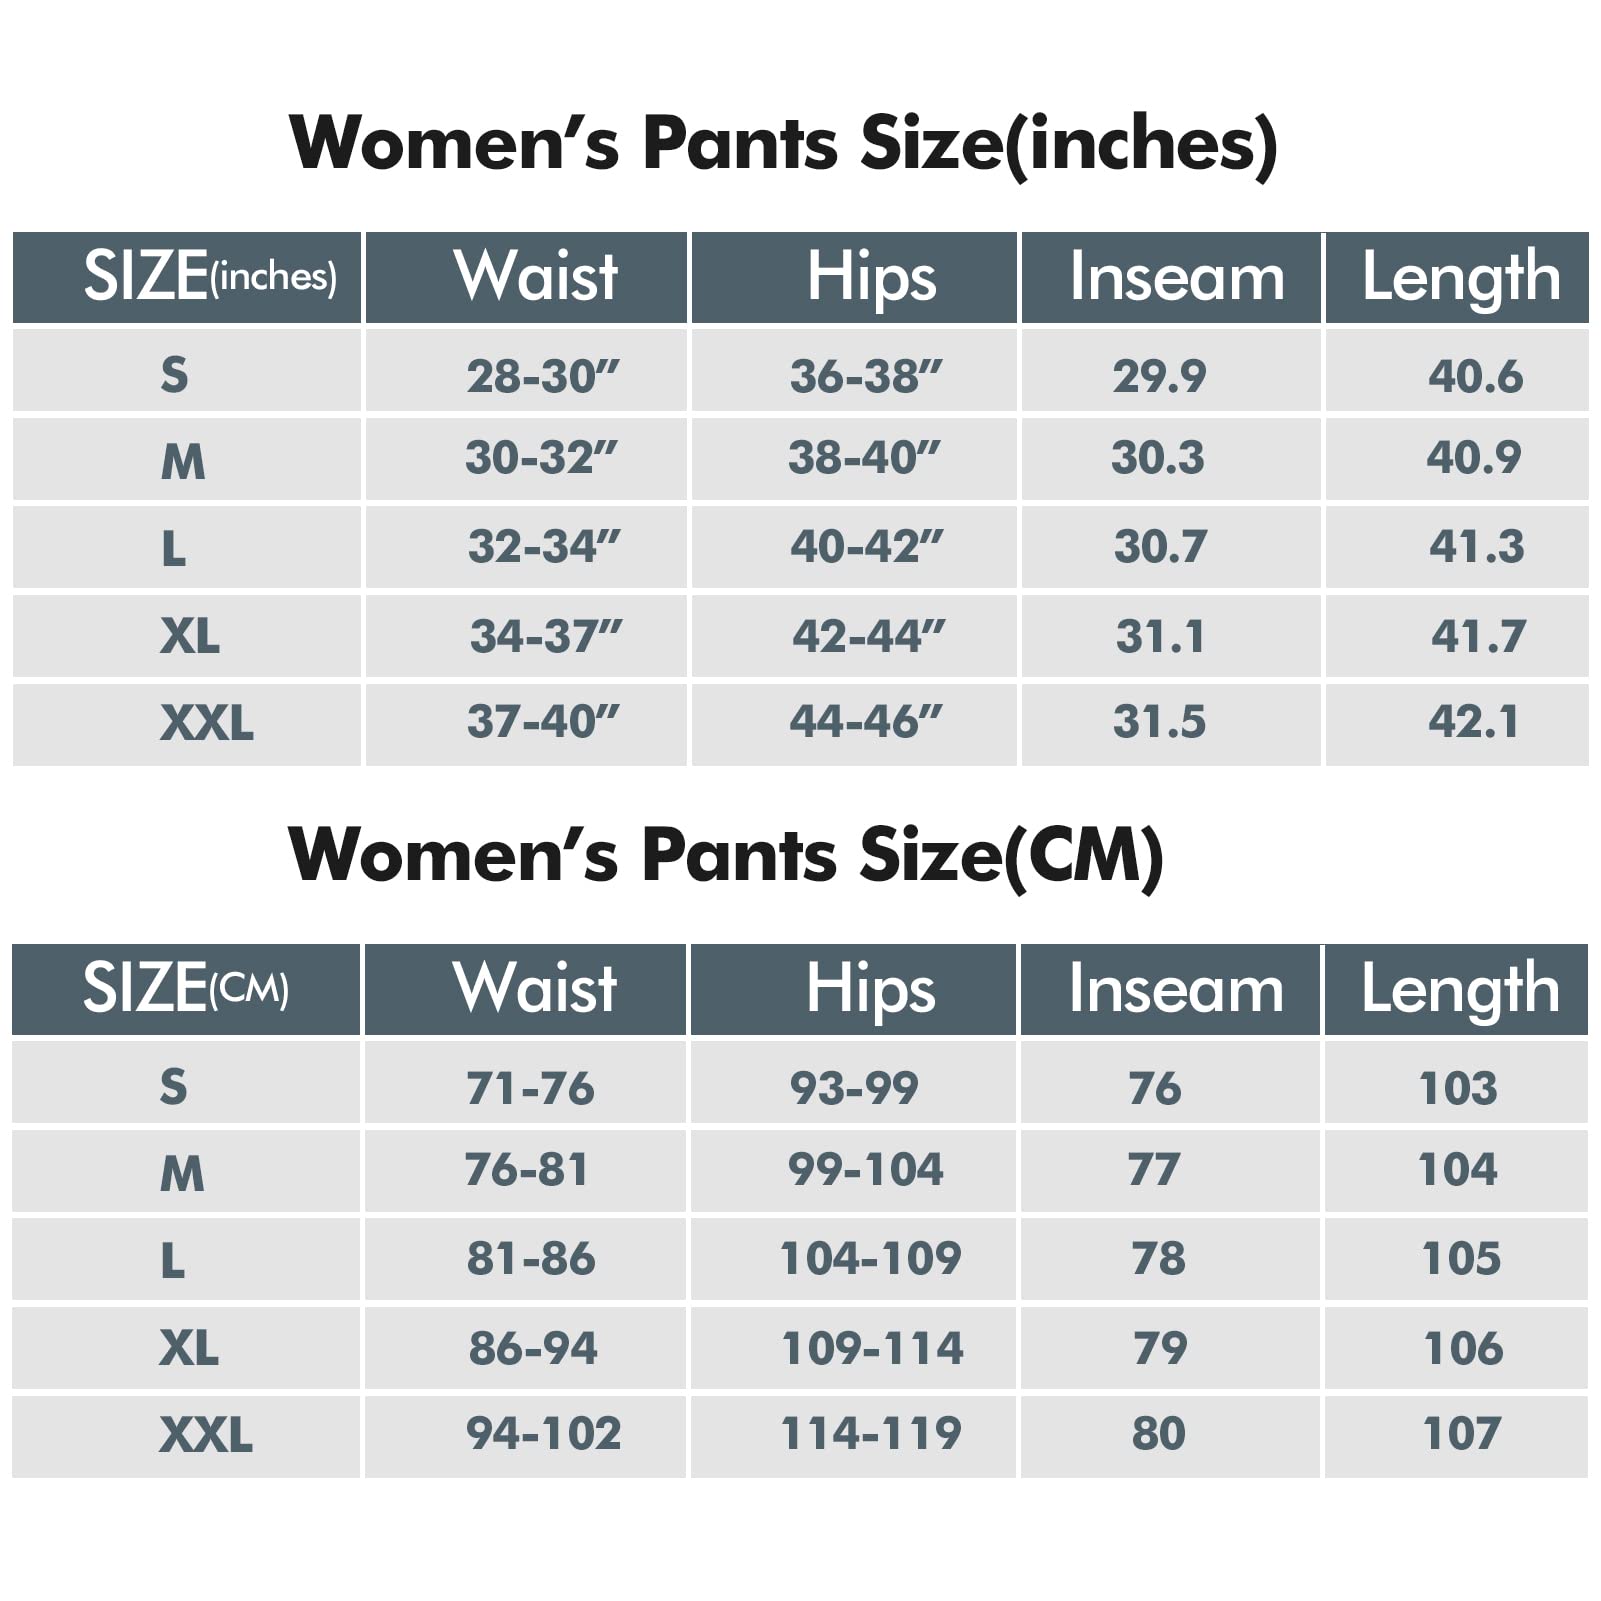 BOWCS Women's Hiking Cargo Pants - Outdoor Athletic Pants